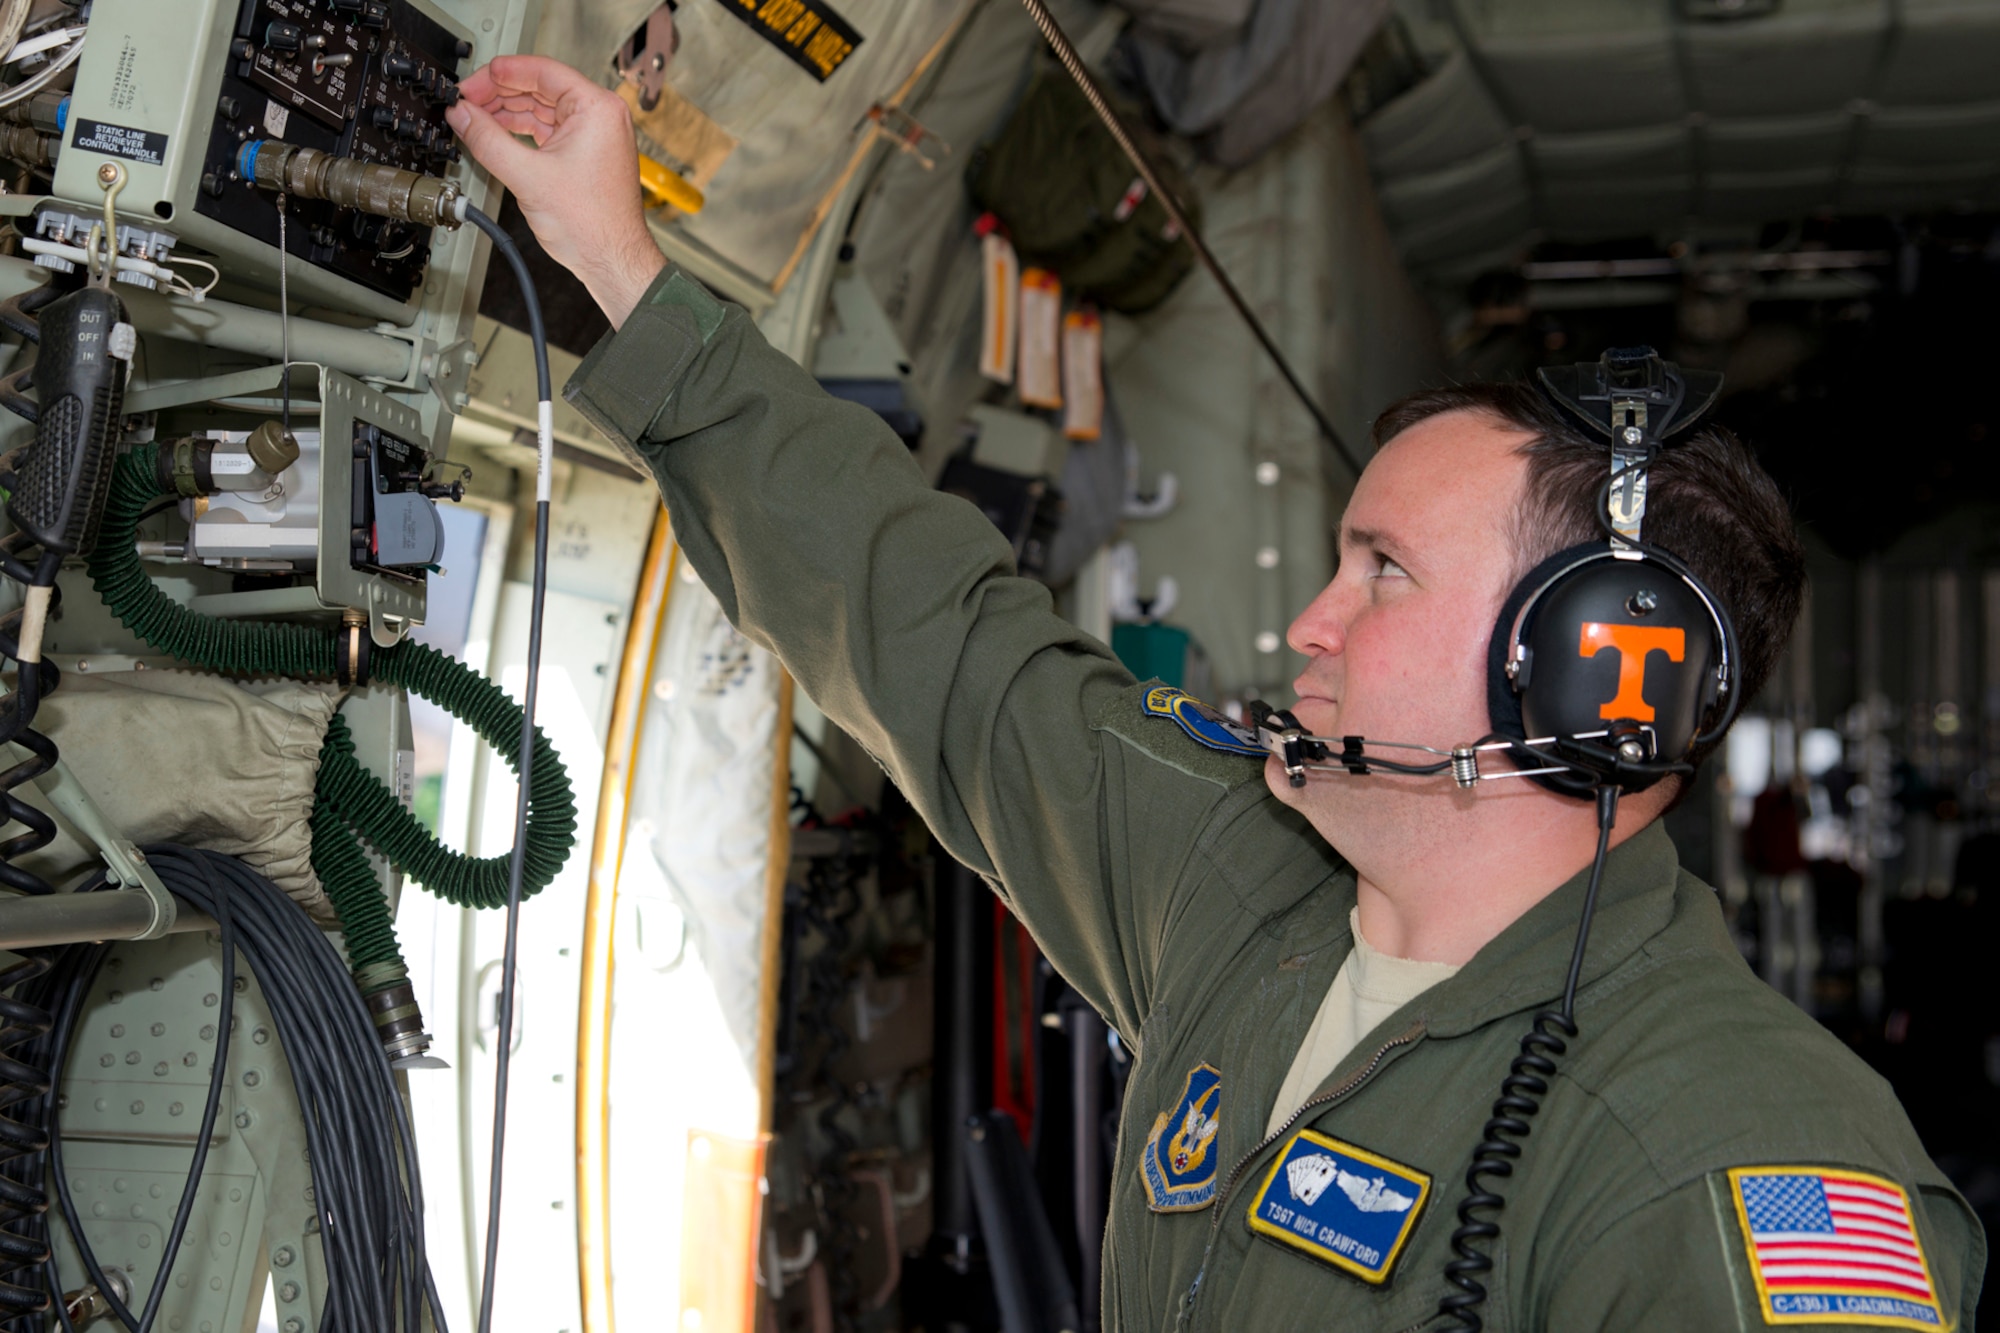 U.S. Air Force Reserve Tech. Sgt. Nick Crawford, loadmaster, 327th Airlift Squadron, checks the public address system during his preflight inspection of a C-130J at Little Rock Air Force Base, Ark., May 13, 2016. Crawford, was part of the first C-130J mission flown by an all Reserve aircrew from the 913th Airlift Group and 327 AS since the group’s transition from the “H” to the “J” model. (U.S. Air Force photo by Master Sgt. Jeff Walston/Released)